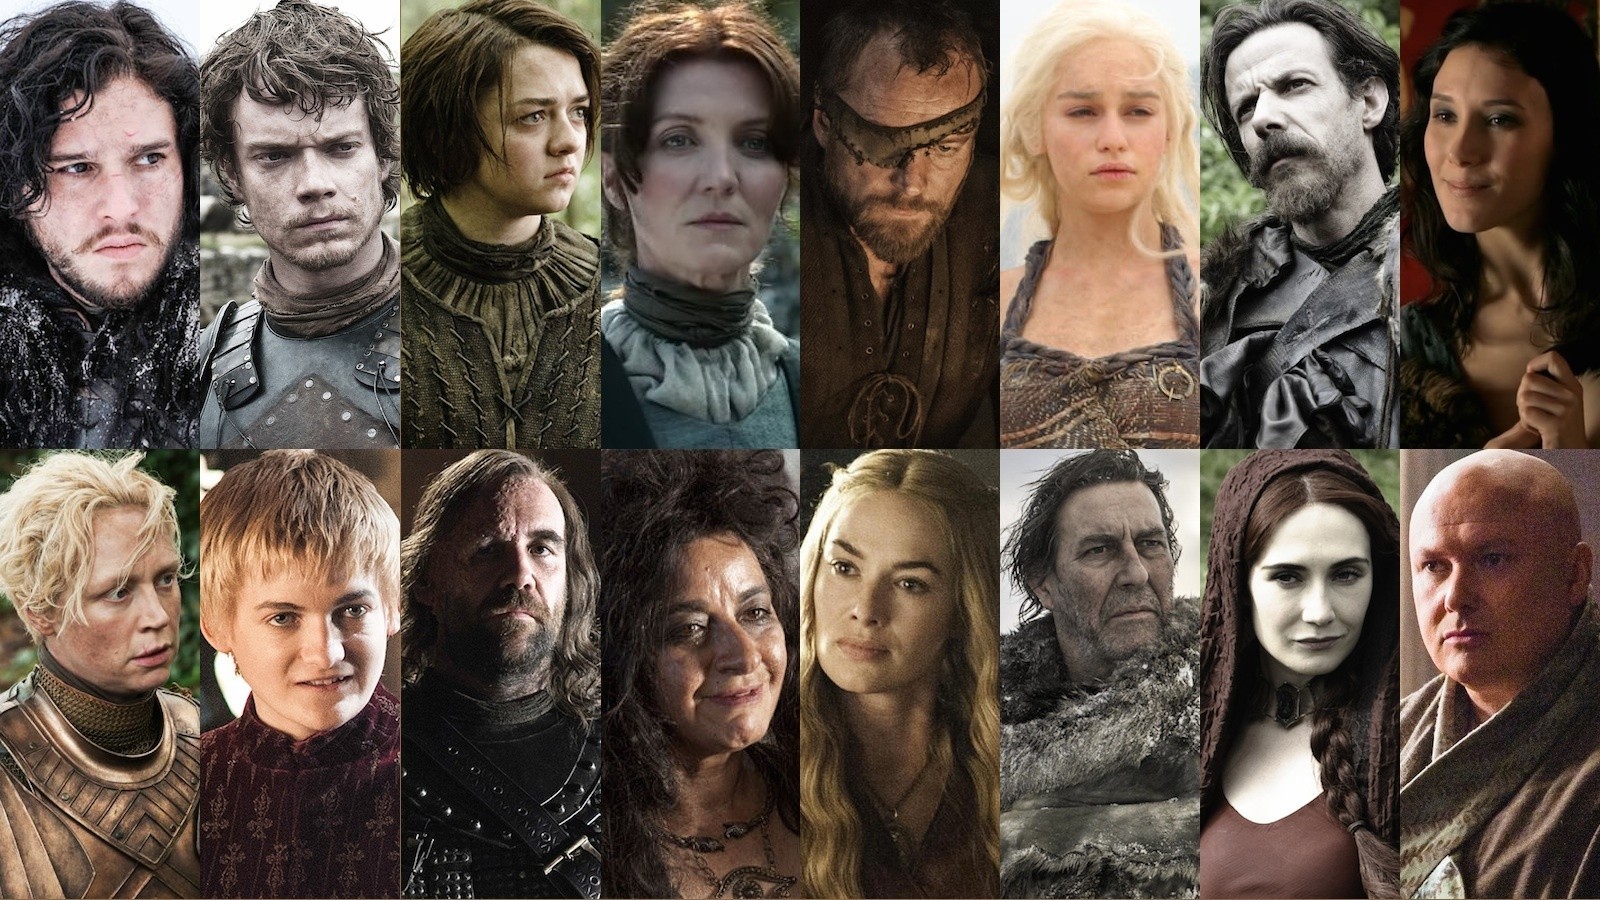 100 'Game of Thrones' characters, ranked from good to evil